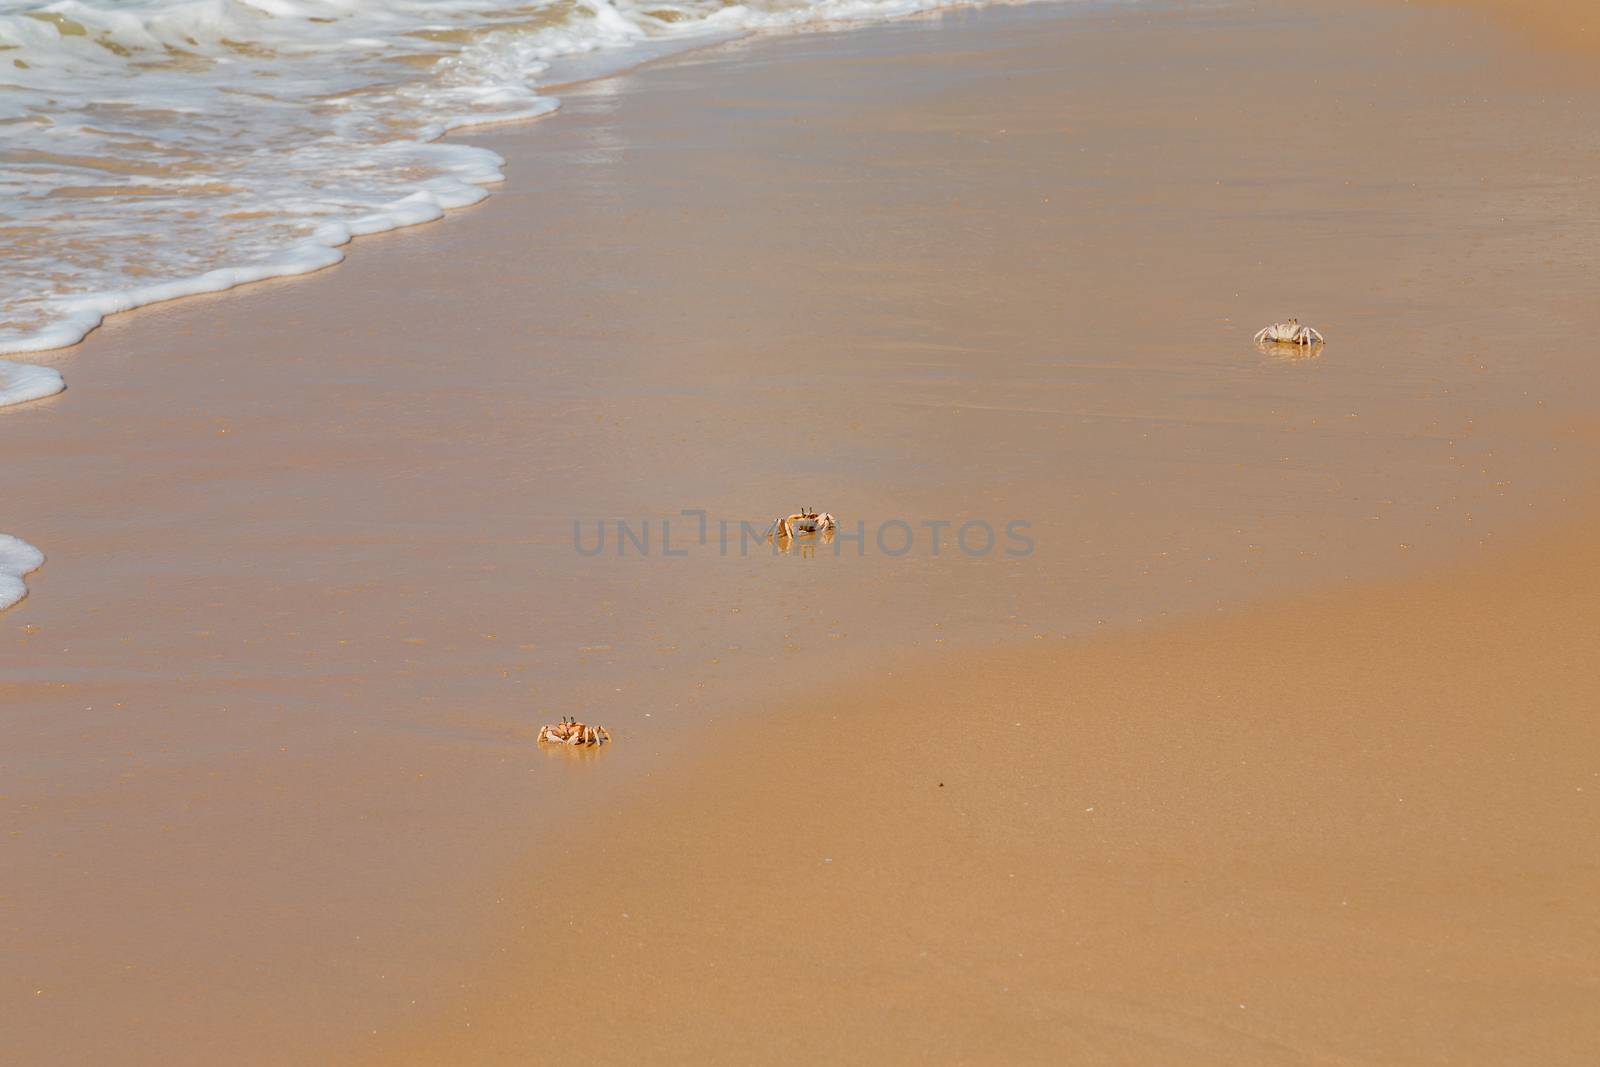 Ghost crabs (Ocypode spp.) on the beach, Mozambique, southern Africa